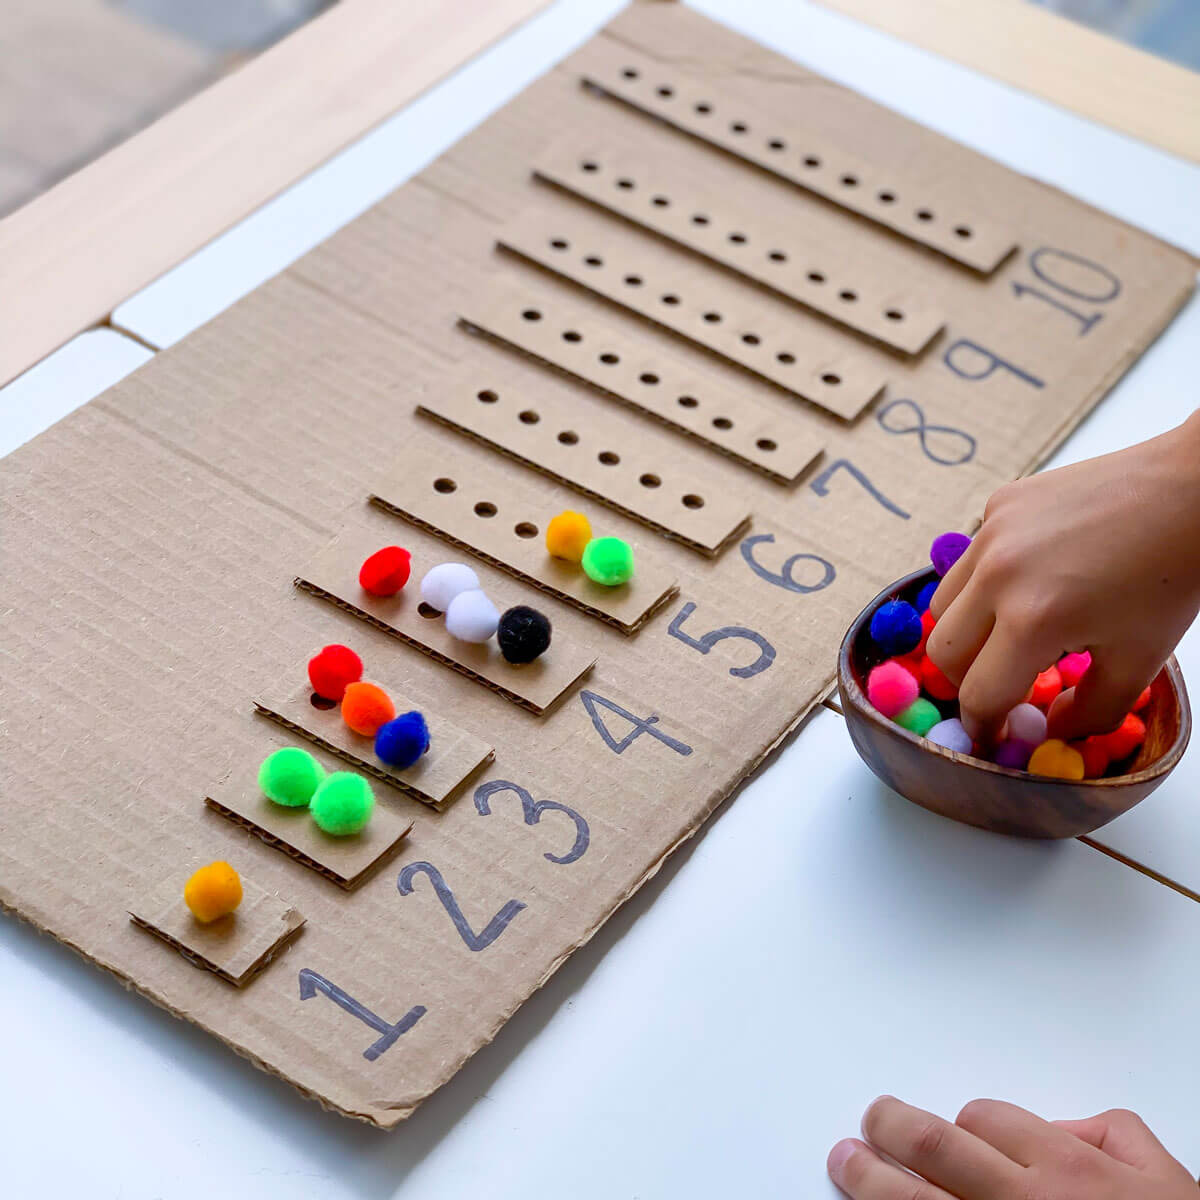 counting activity diy number board learning numbers 1 through 10